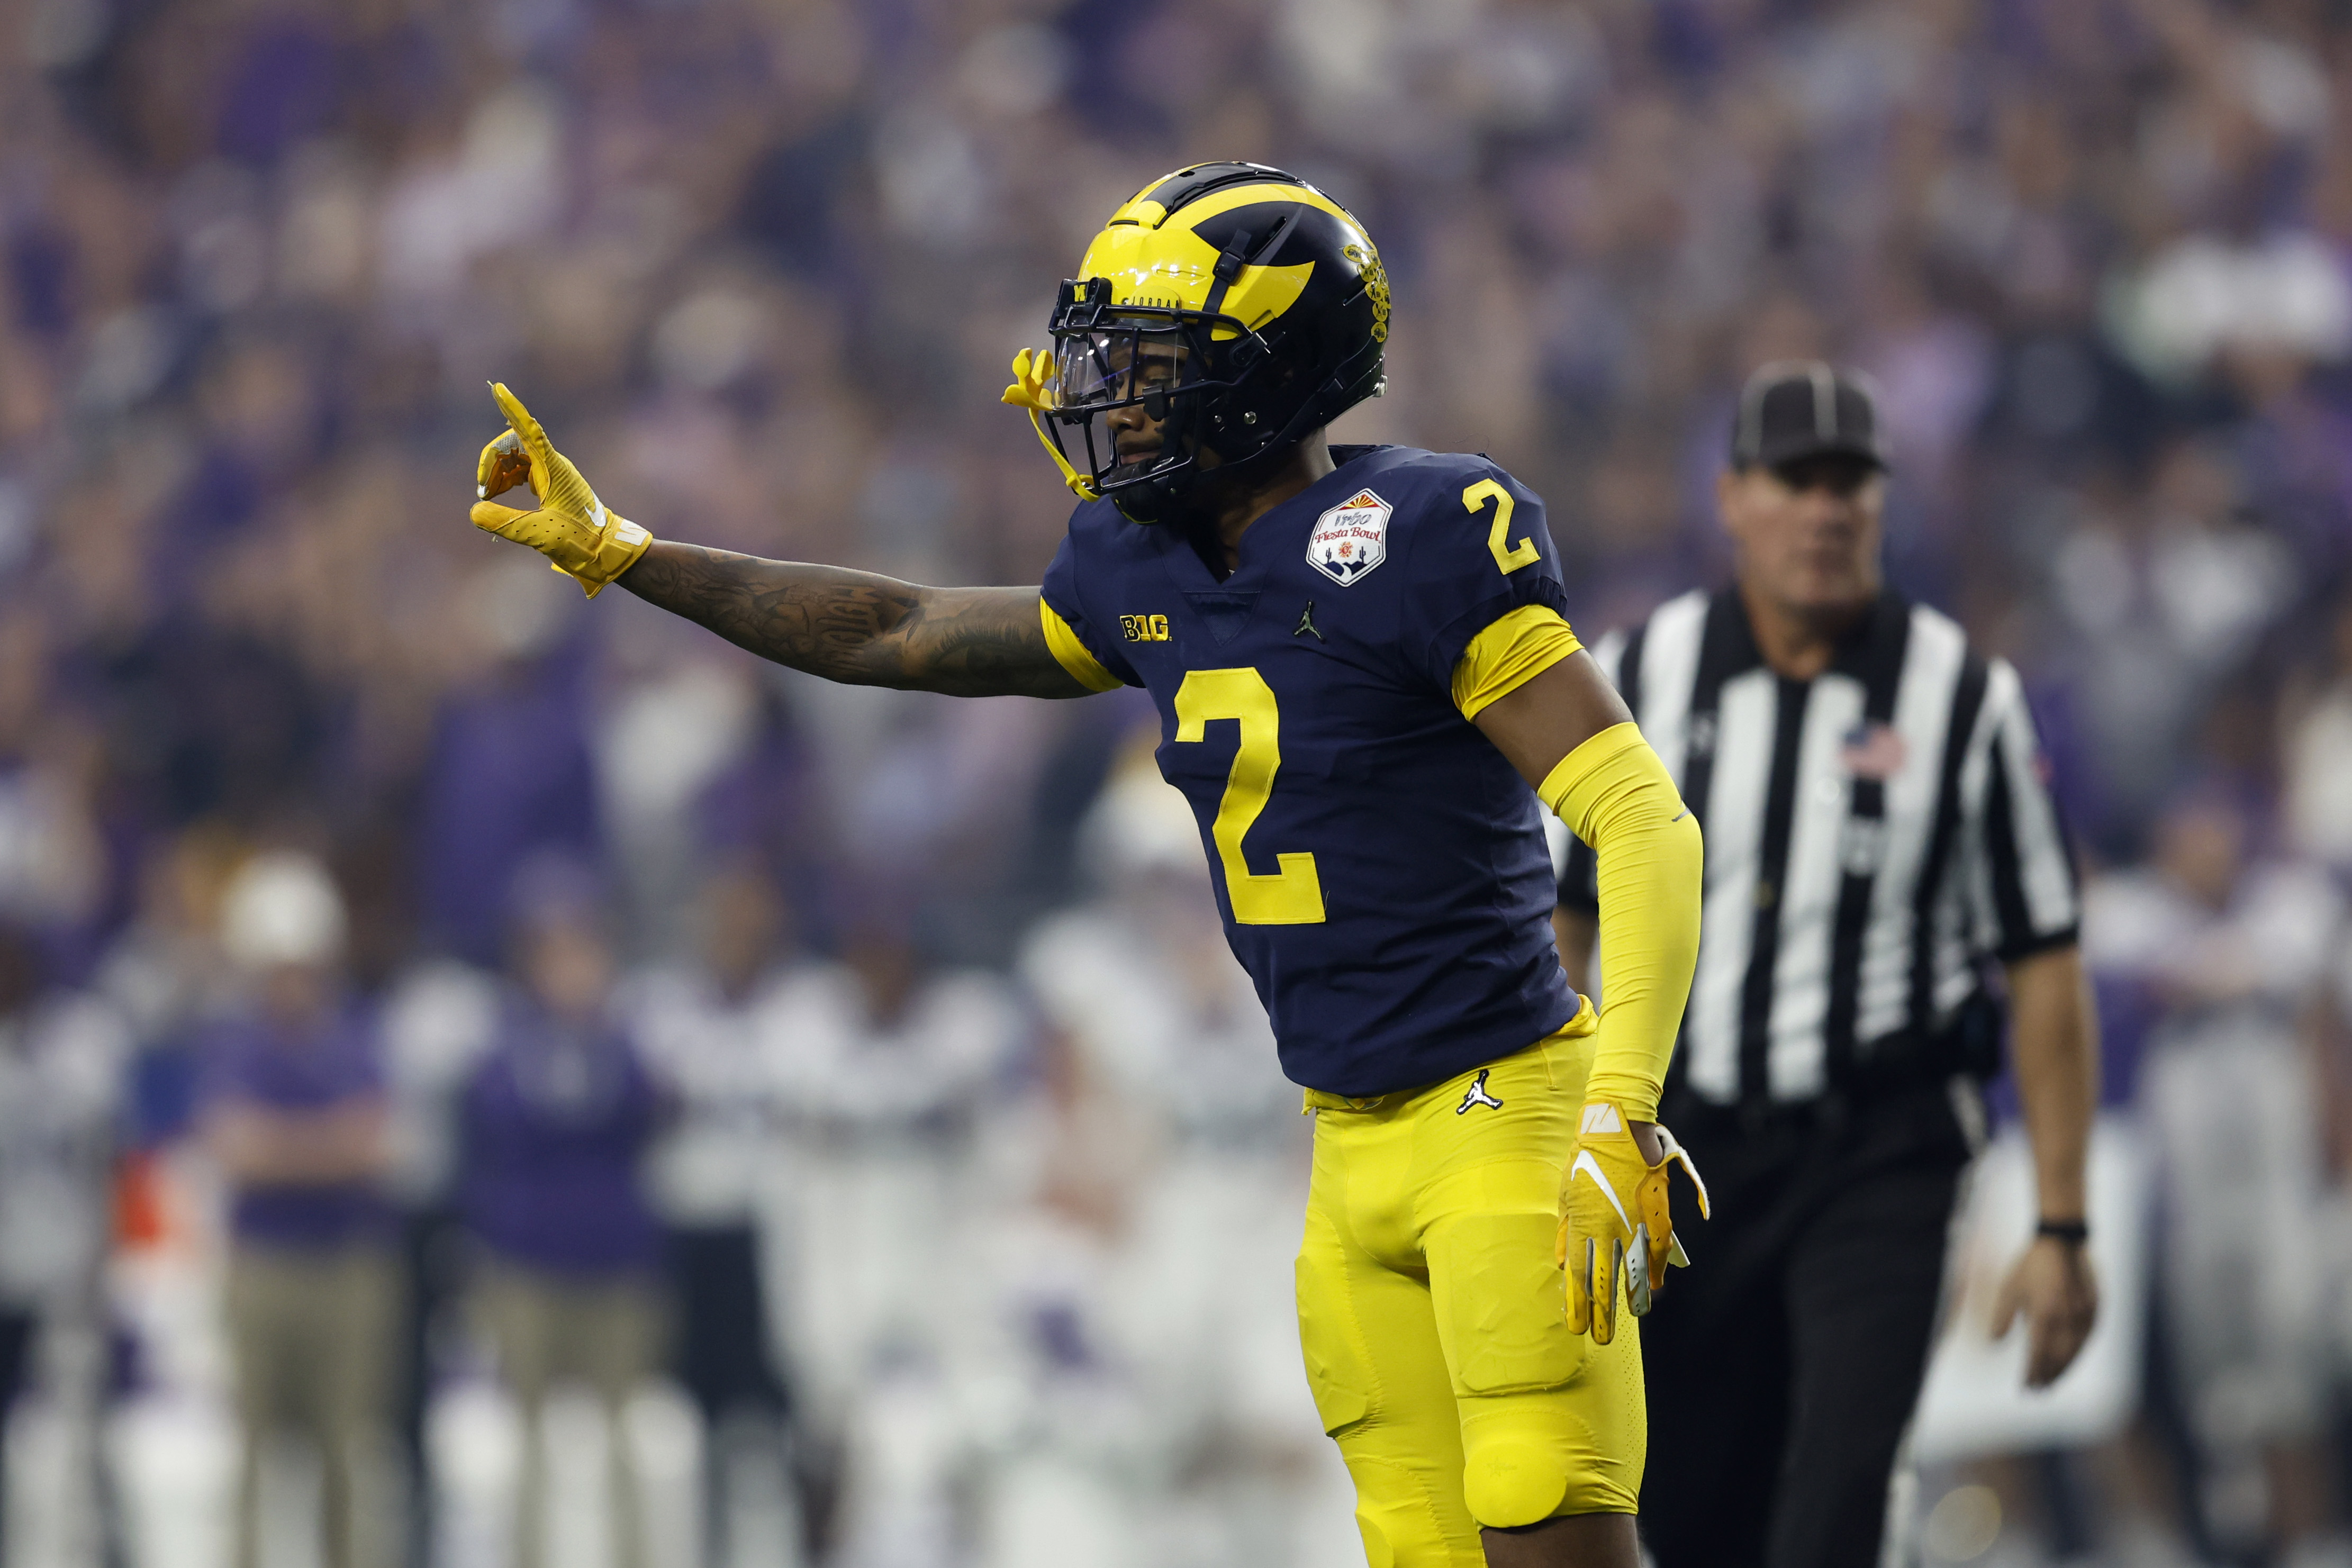 Ranking the Big Ten's football uniforms: Michigan or Ohio State at